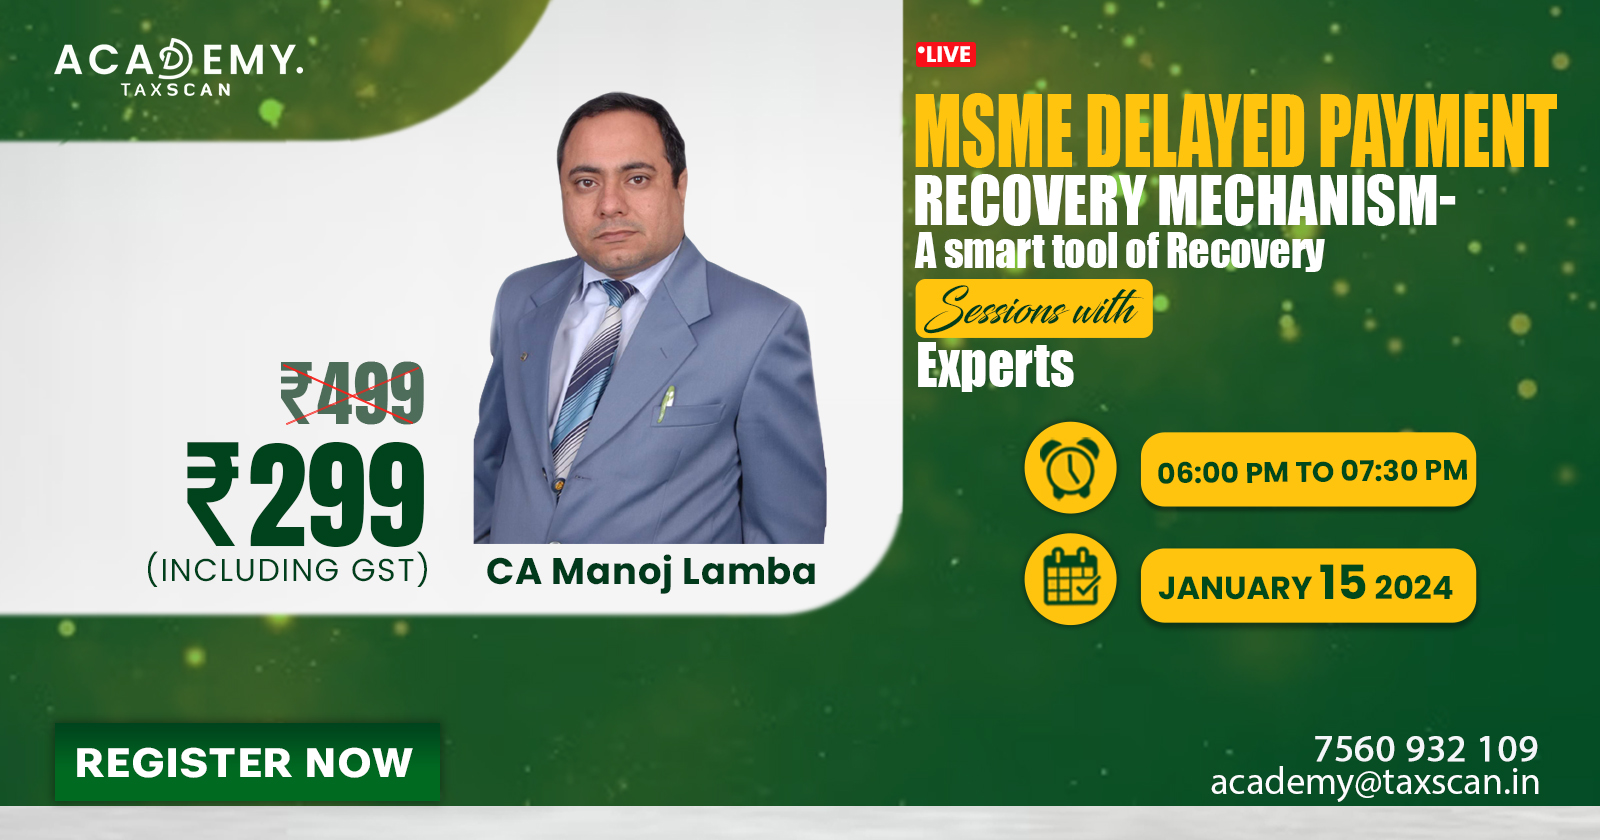 Live Webinar - MSME - Payment Recovery Mechanism - Recovery Sessions with Experts - Msme delayed payment recovery mechanism samadhaan - MSME Samadhaan - Taxscan Academy